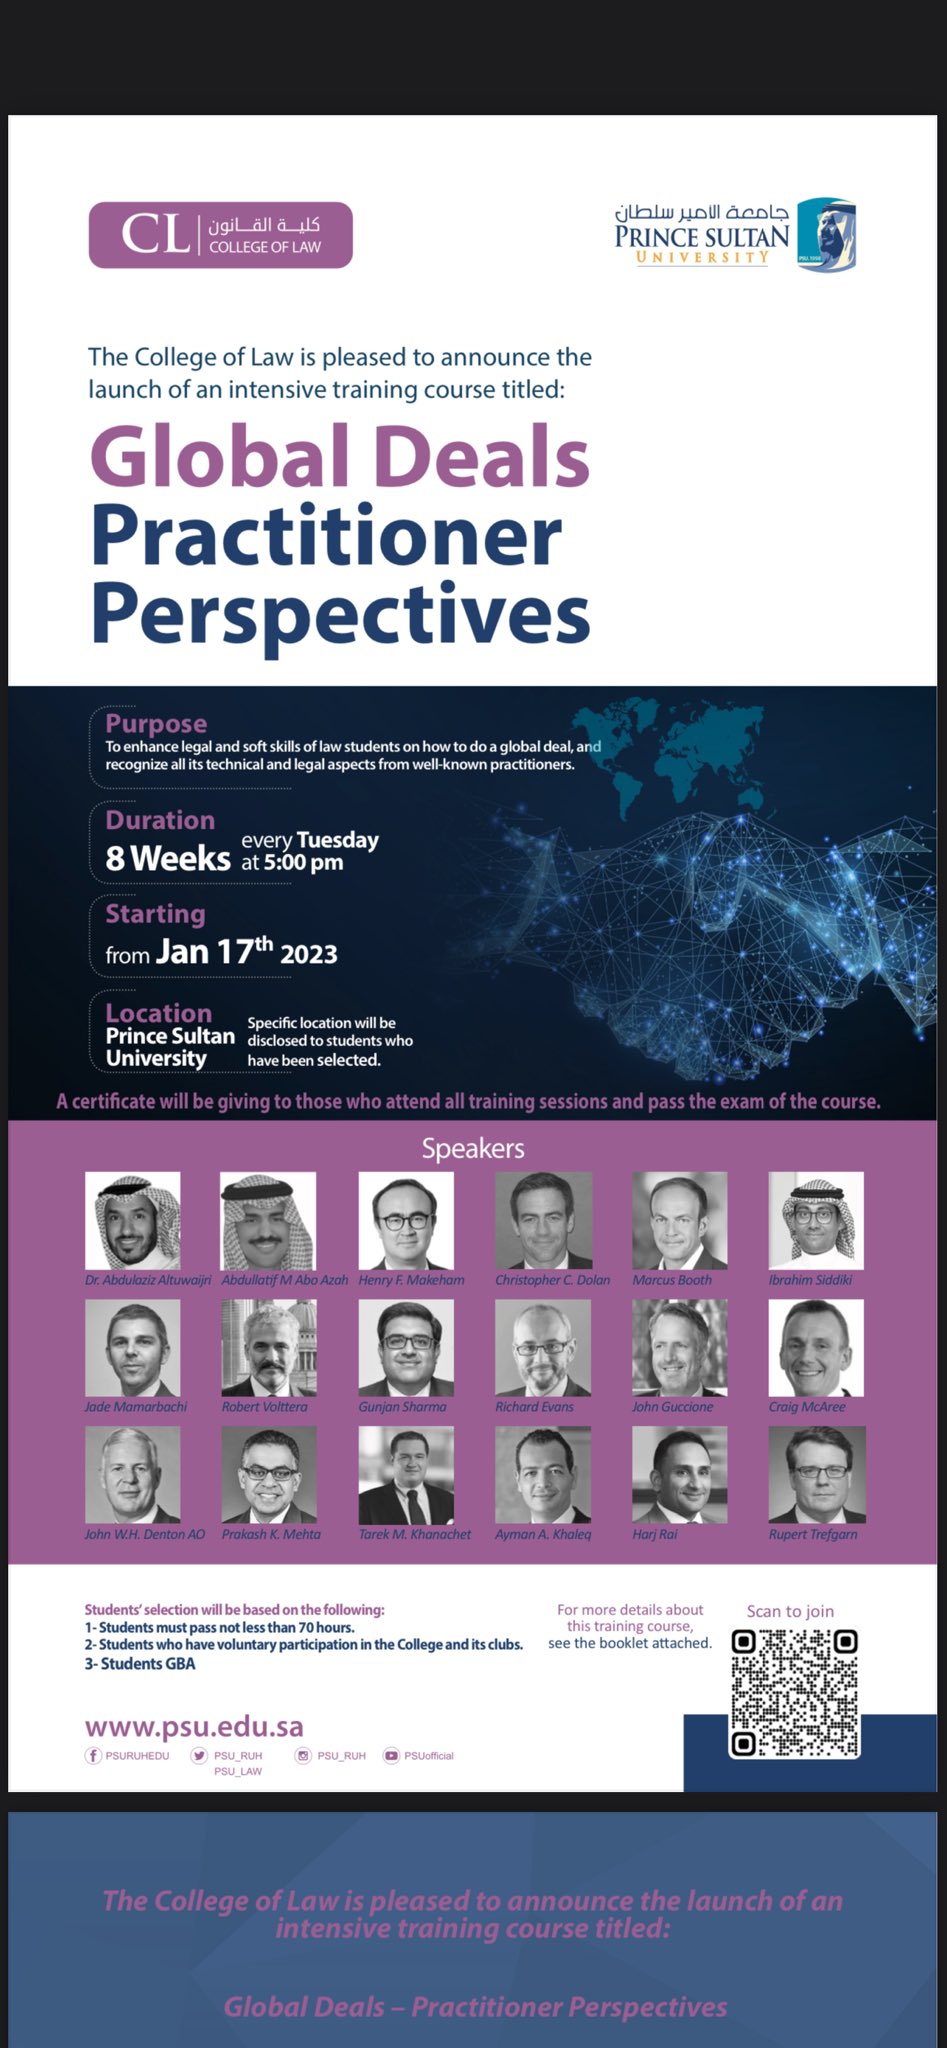 An Intensive Training Program Entitled "International Deals from the Practitioner's Perspectives"